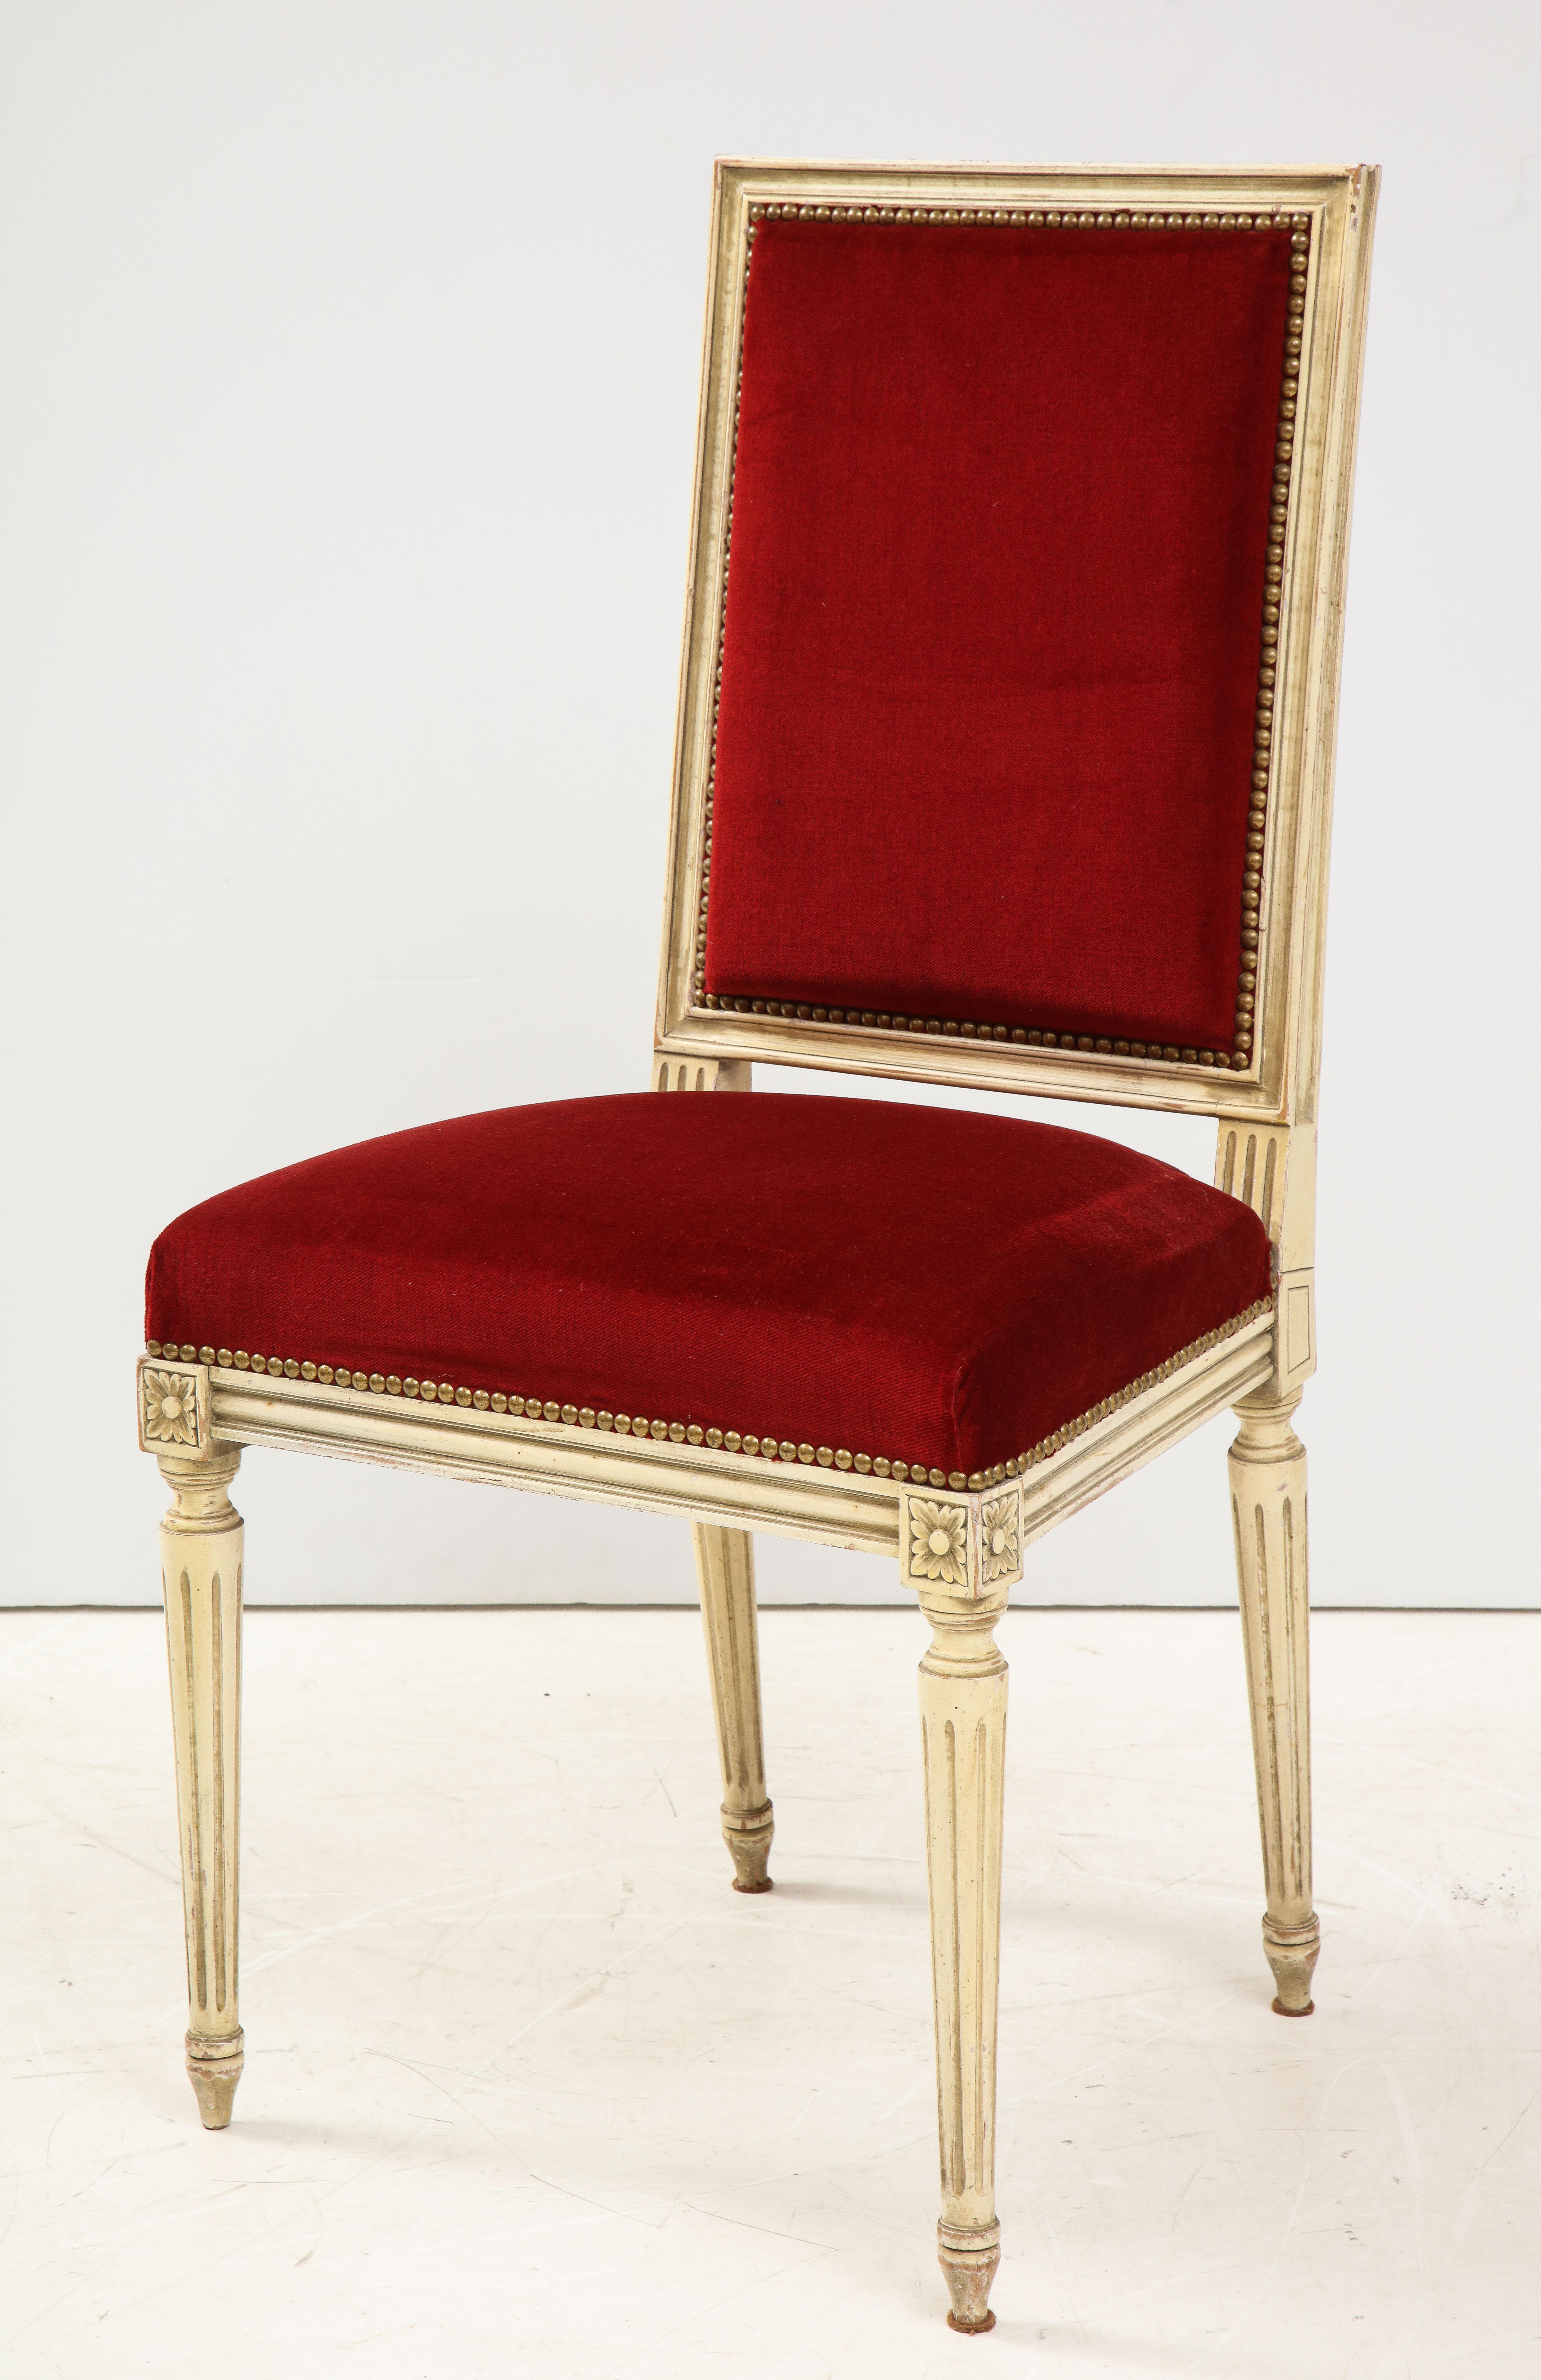 We will never tire of Louis XVI style dining chairs, as their clean lines and timeless elegance, can enhance both traditional and contemporary interiors. These eight, upholstered in red velvet with a painted finish, feature many of the lovely